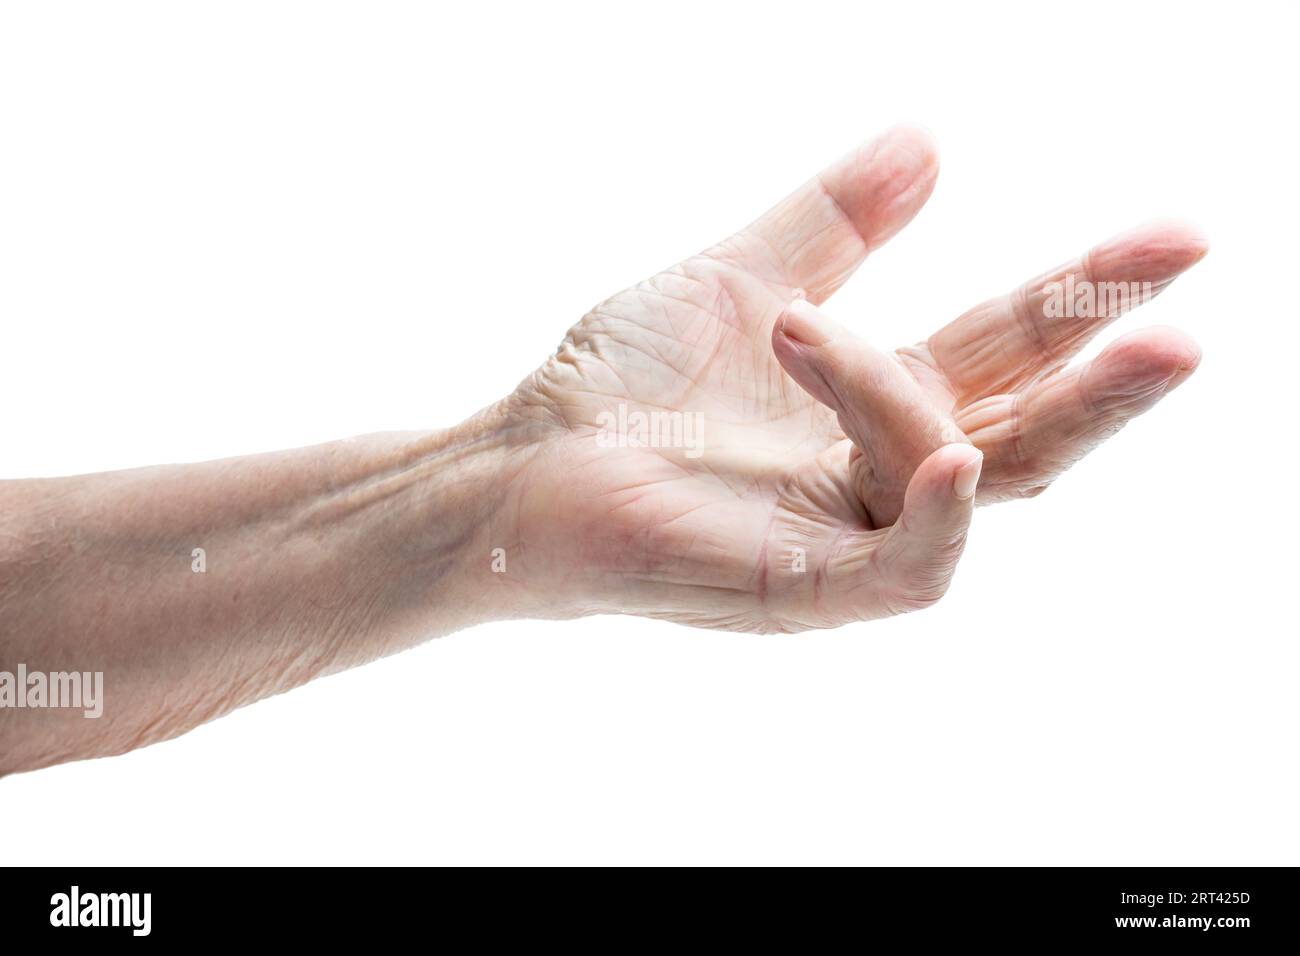 Hand  of an old woman with Dupuytren's contracture disease Stock Photo